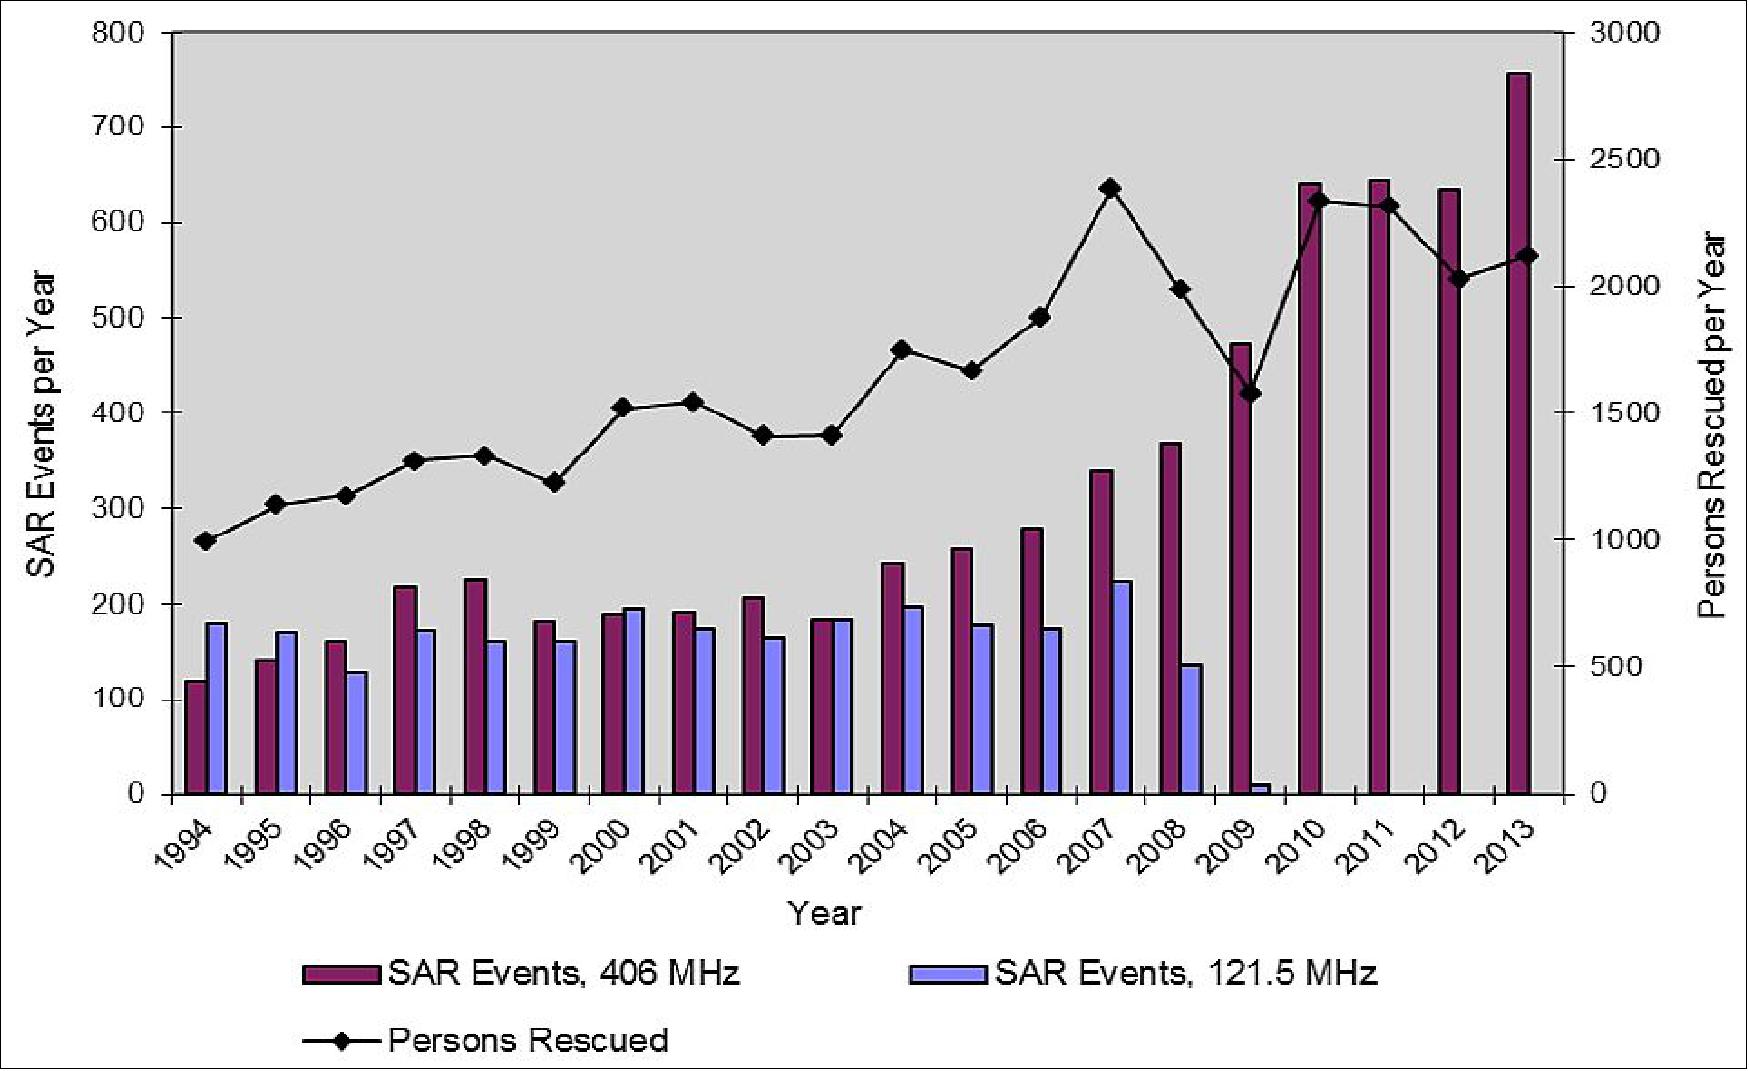 Figure 19: Number of SAR Events and Persons Rescued with the Assistance of Cospas-Sarsat Alert Data (January 1994 to December 2013)